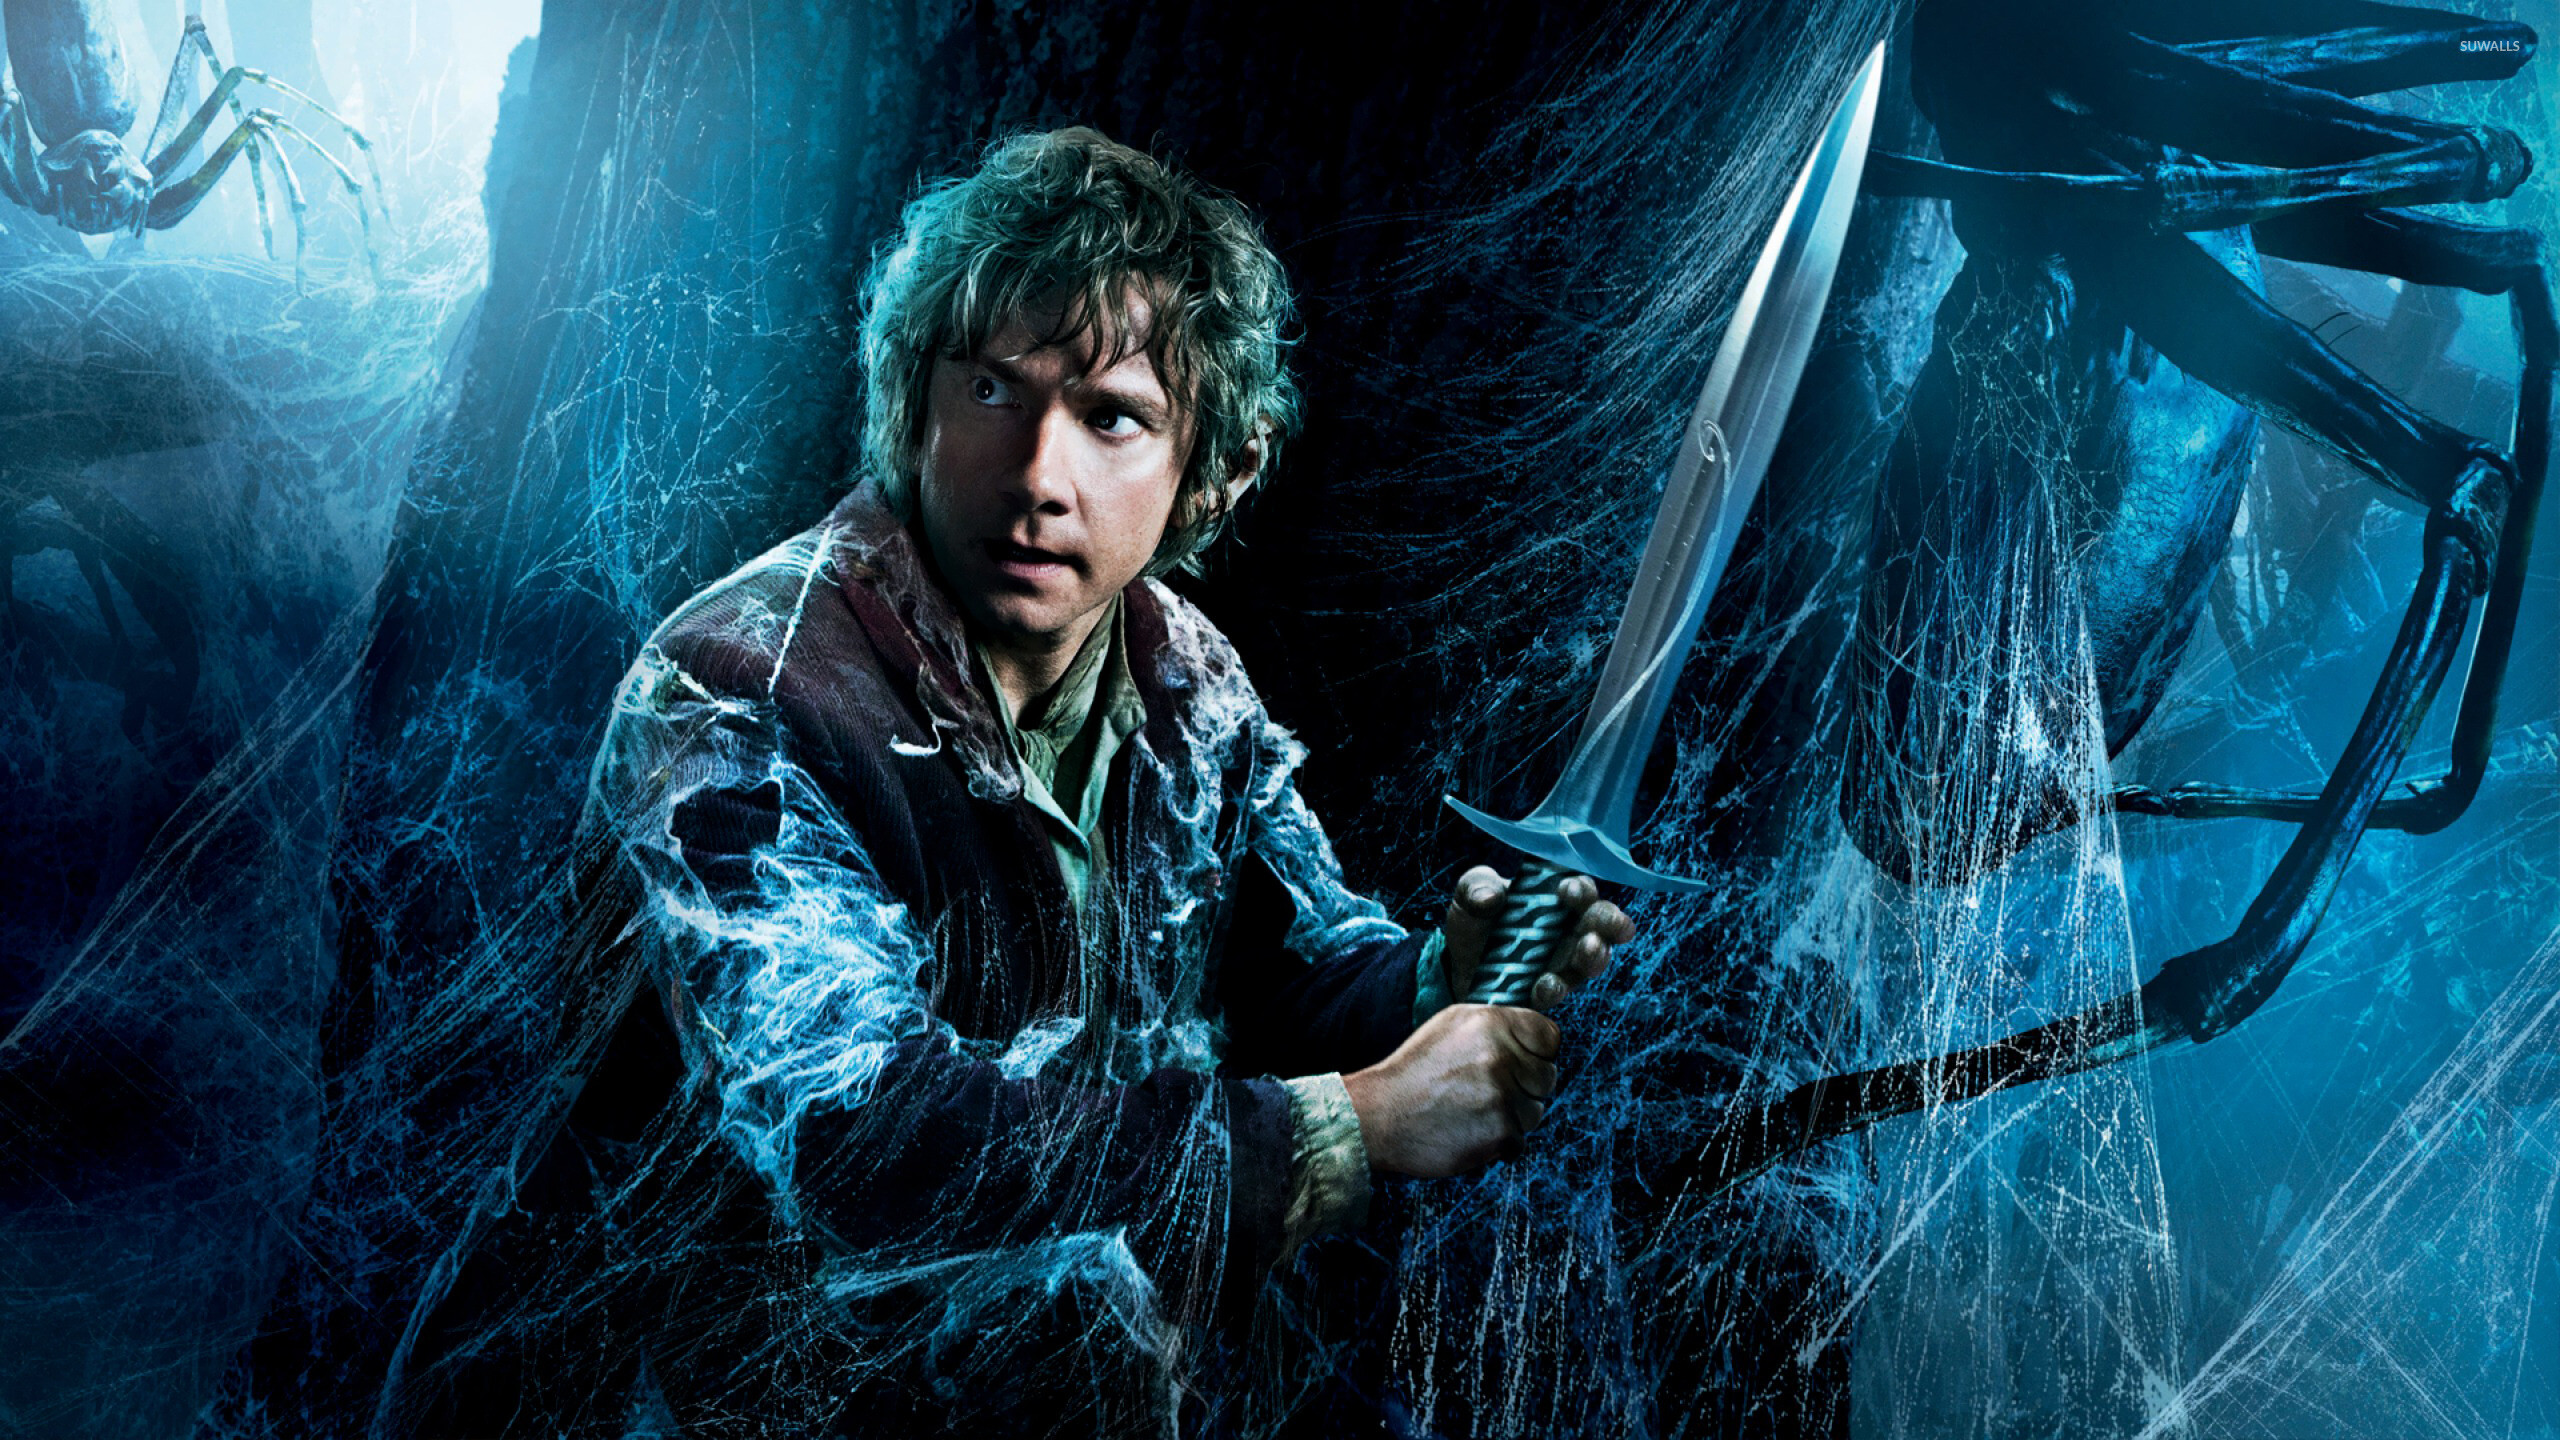 The Hobbit: The Desolation of Smaug, Bilbo, A secondary character in The Lord of the Rings. 2560x1440 HD Wallpaper.